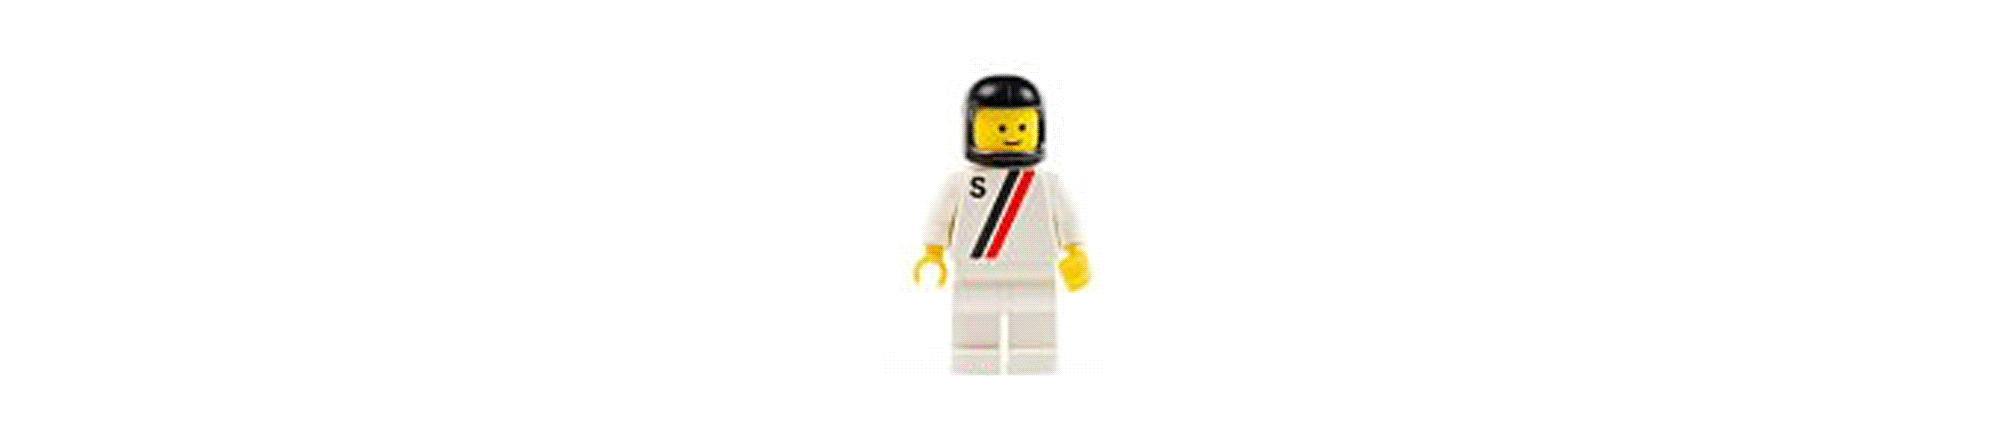 Animation of lego characters to represent customizable LLMs